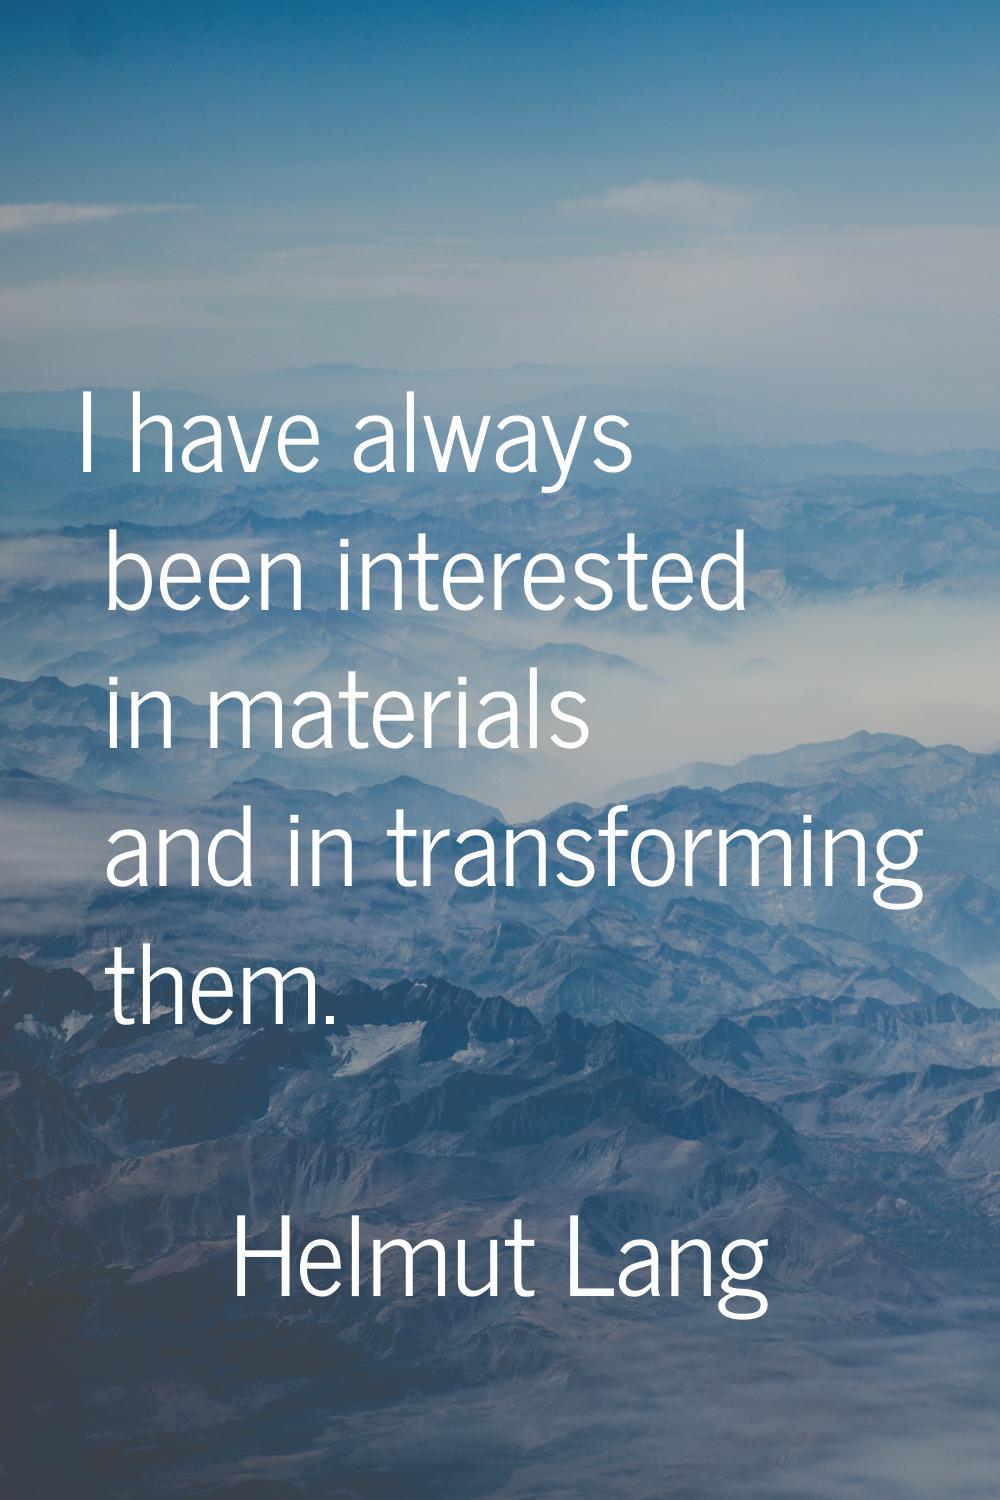 I have always been interested in materials and in transforming them.